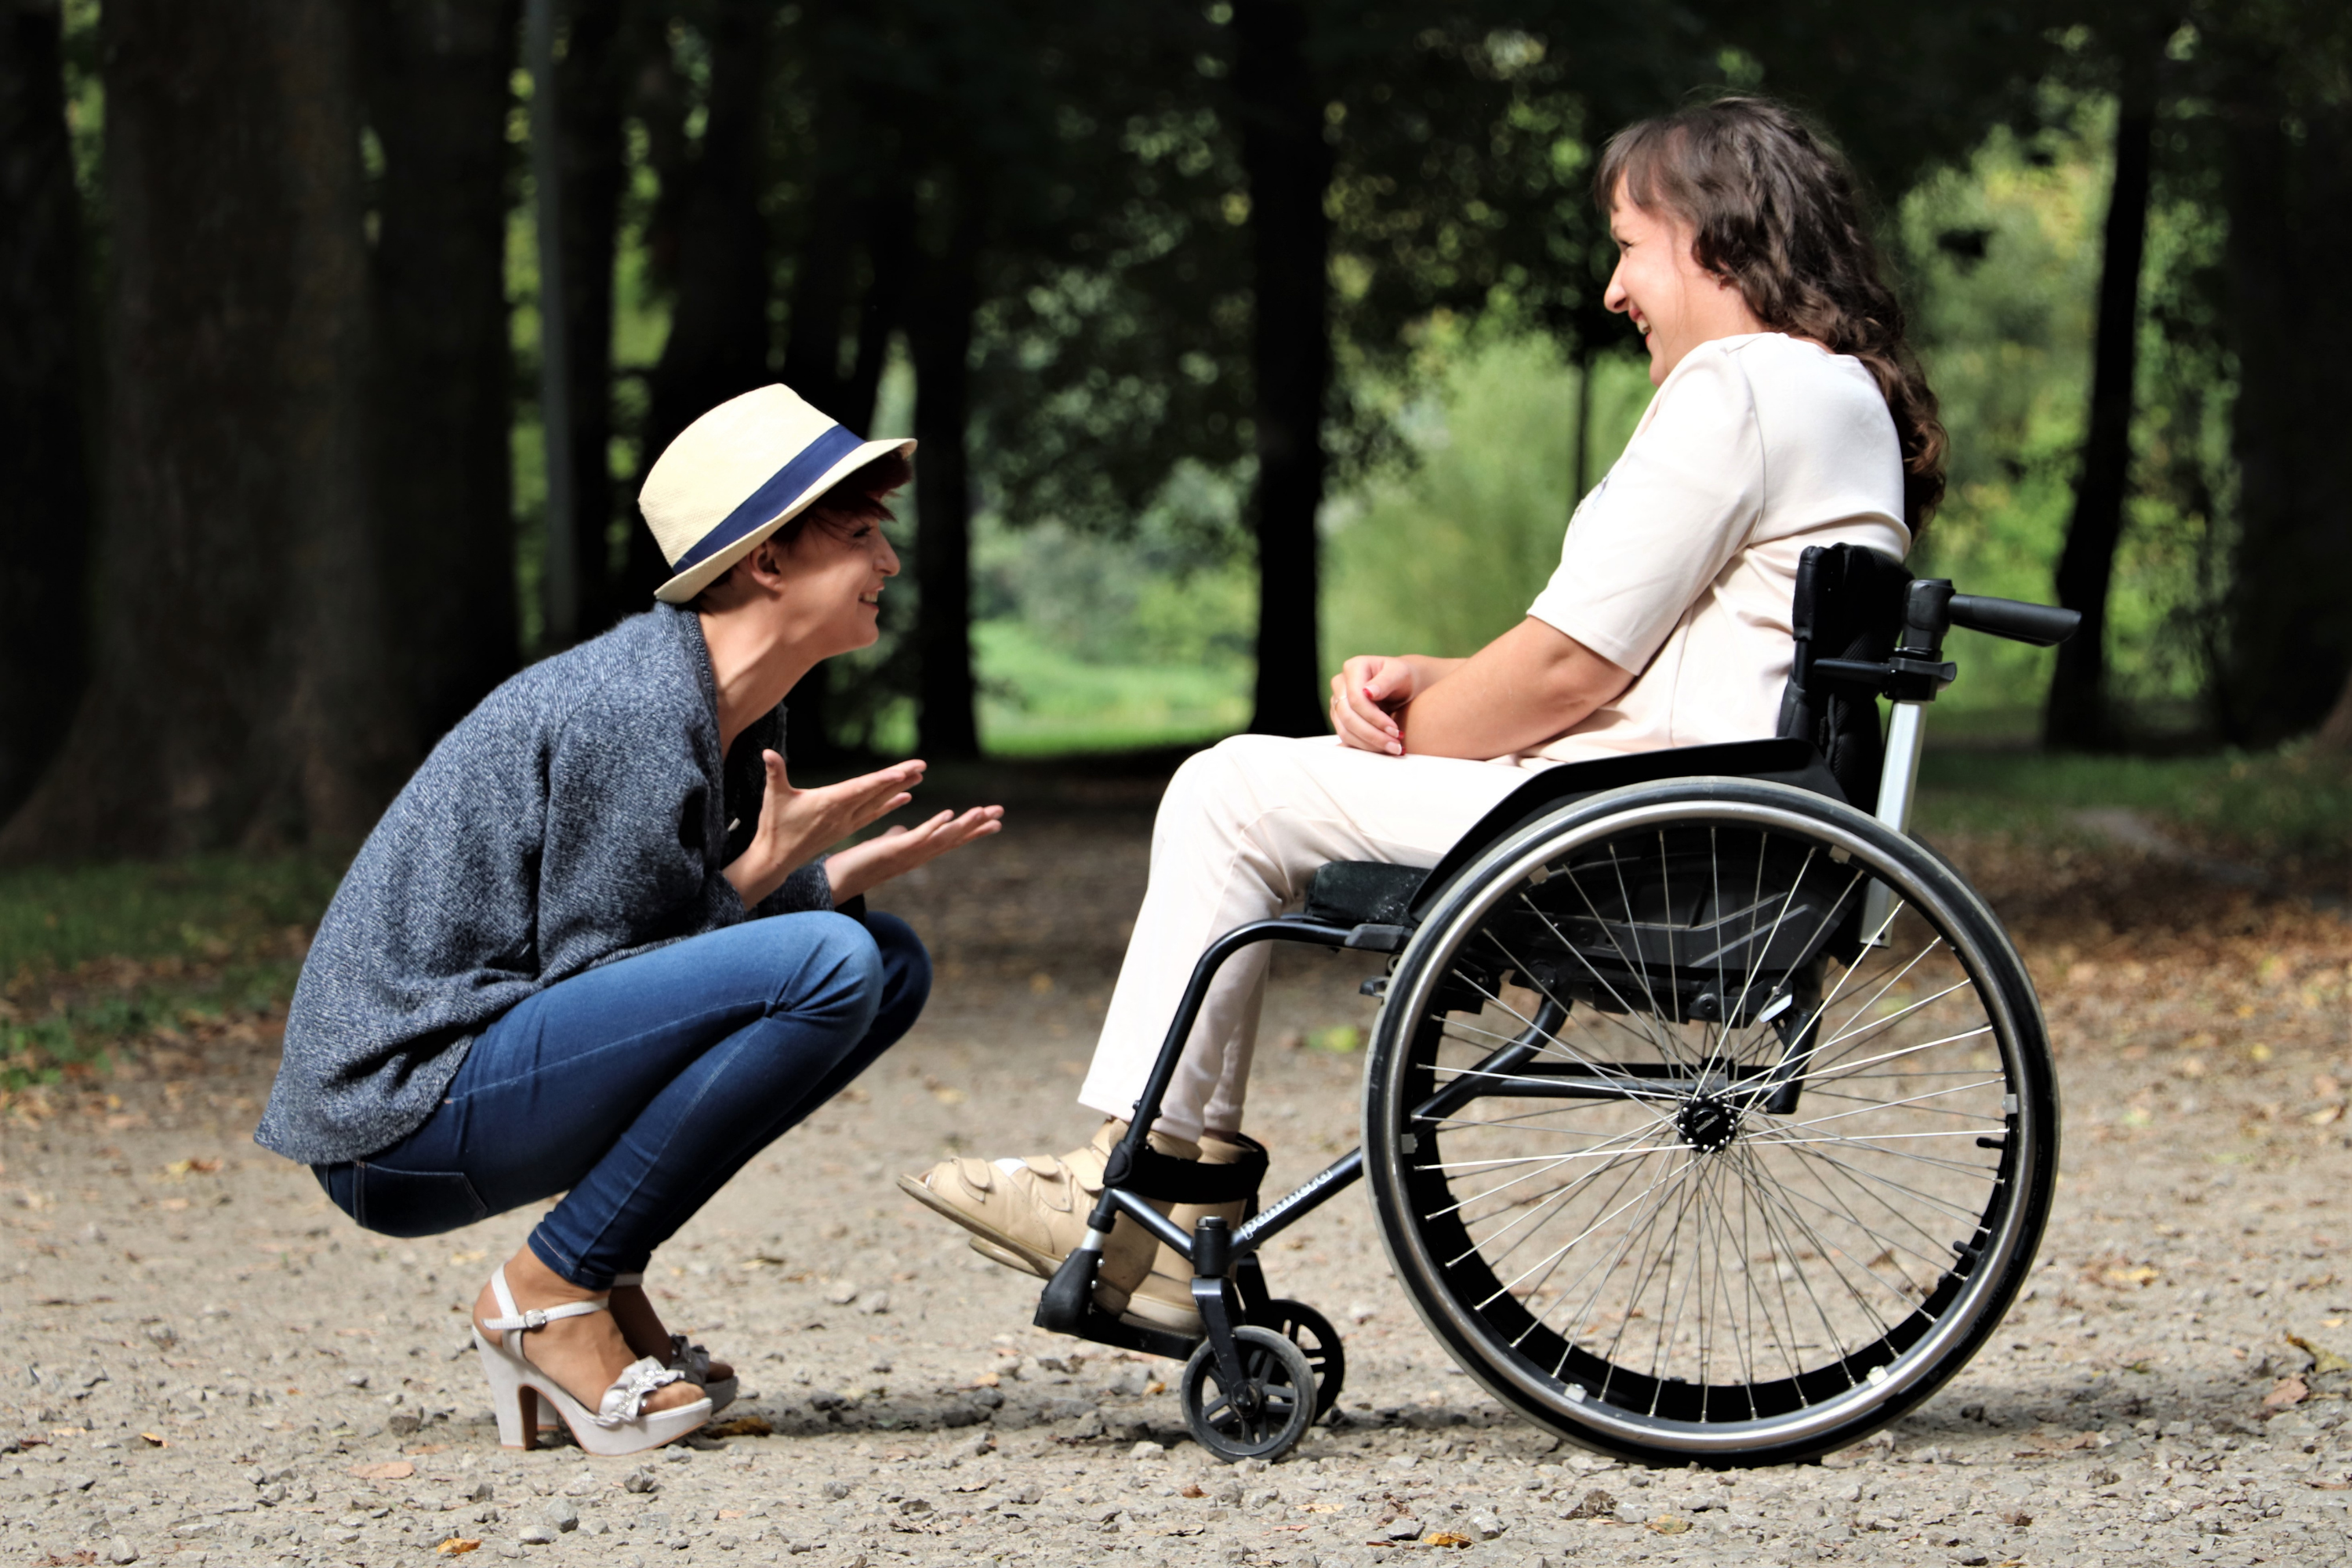 meeting of two people, including one with a disability